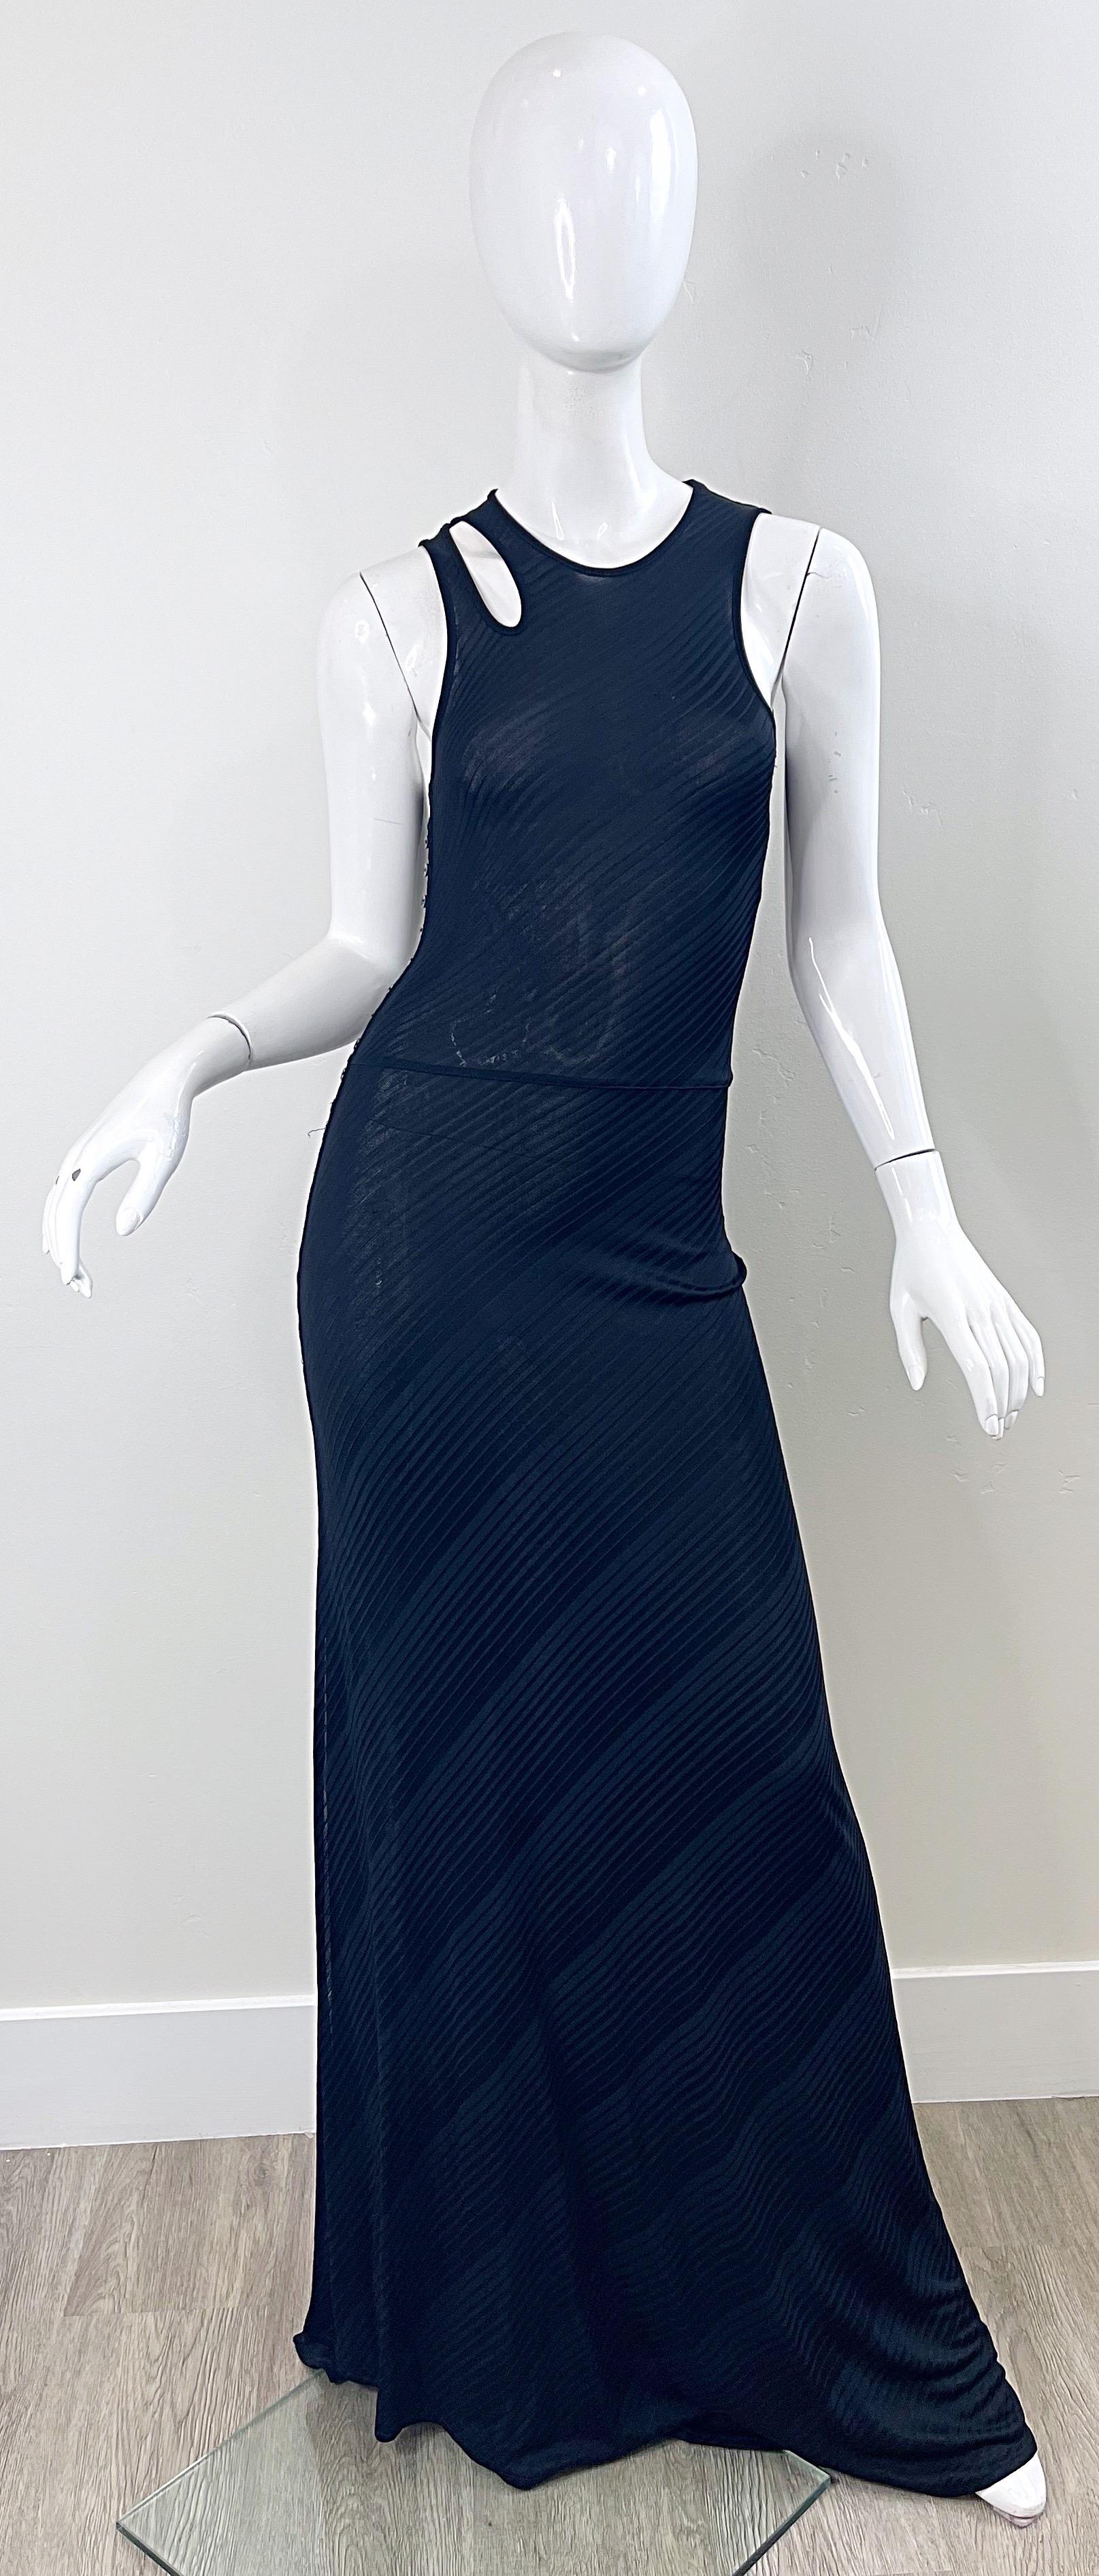 Gianni Versace Versus Spring 2001 Black Cut Out Sleeveless Vintage Jersey Gown  In Excellent Condition For Sale In San Diego, CA